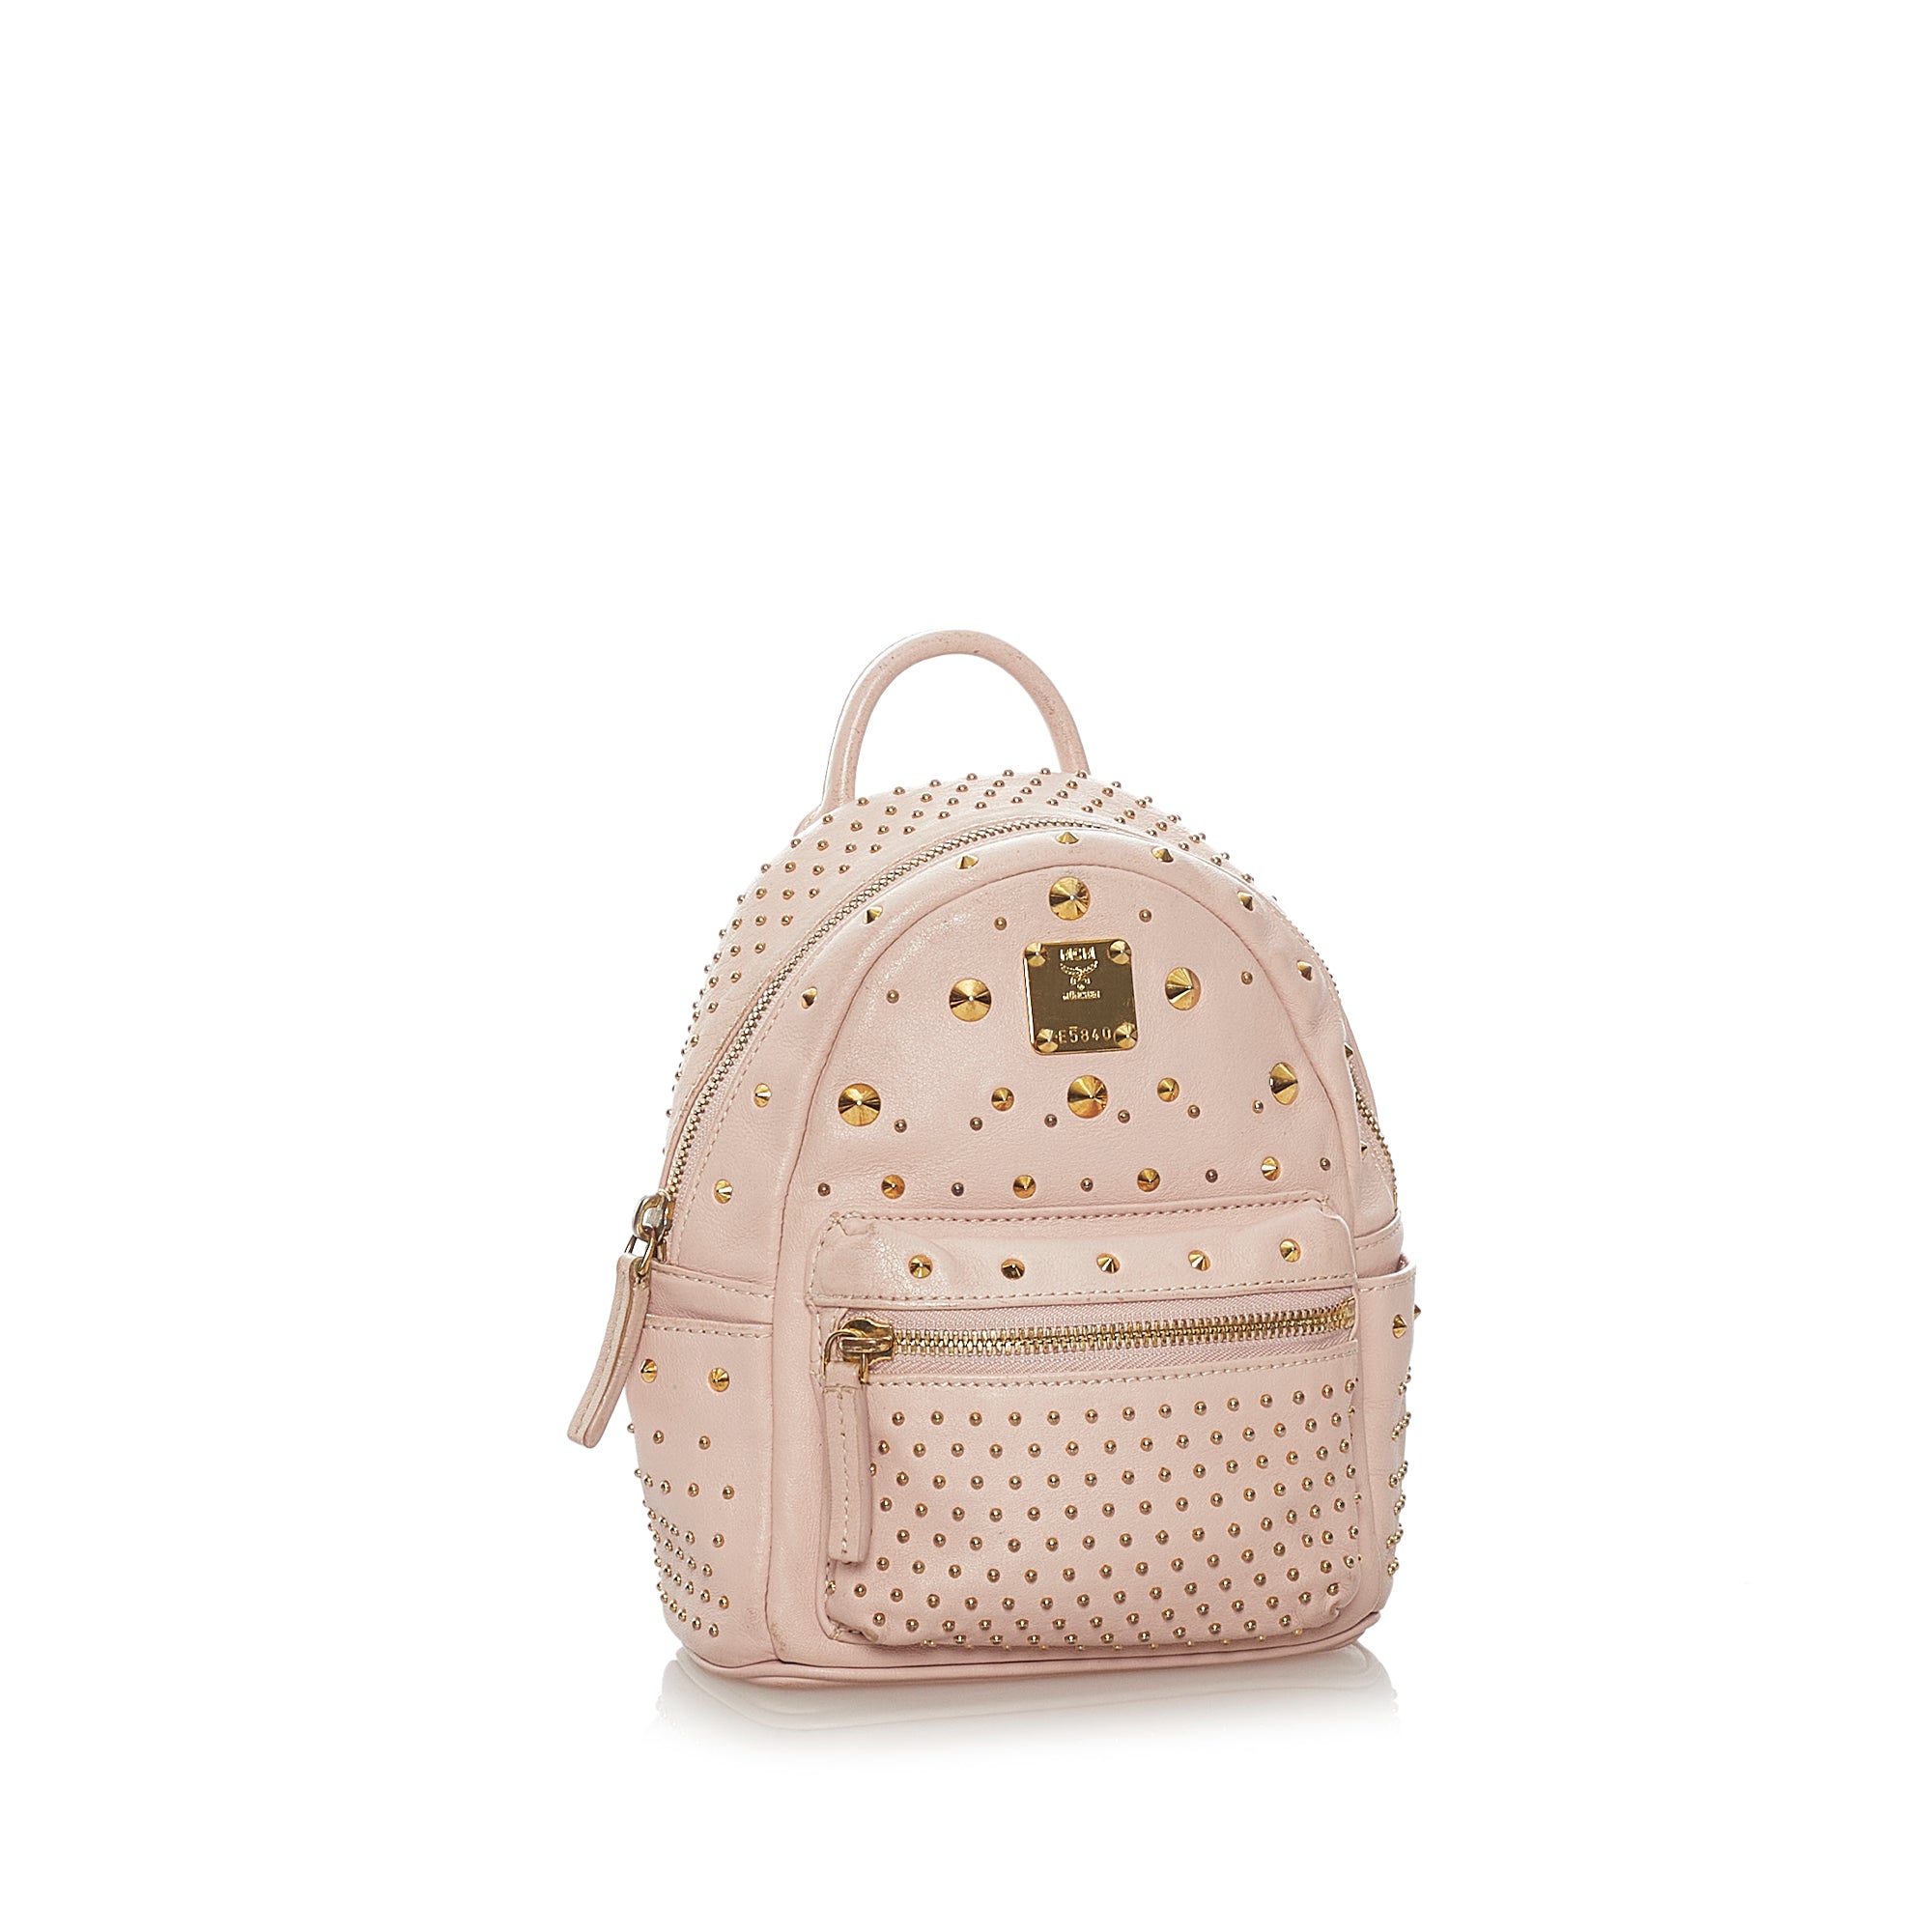 mcm pink backpack with spikes BRAND NEW w/dust bag